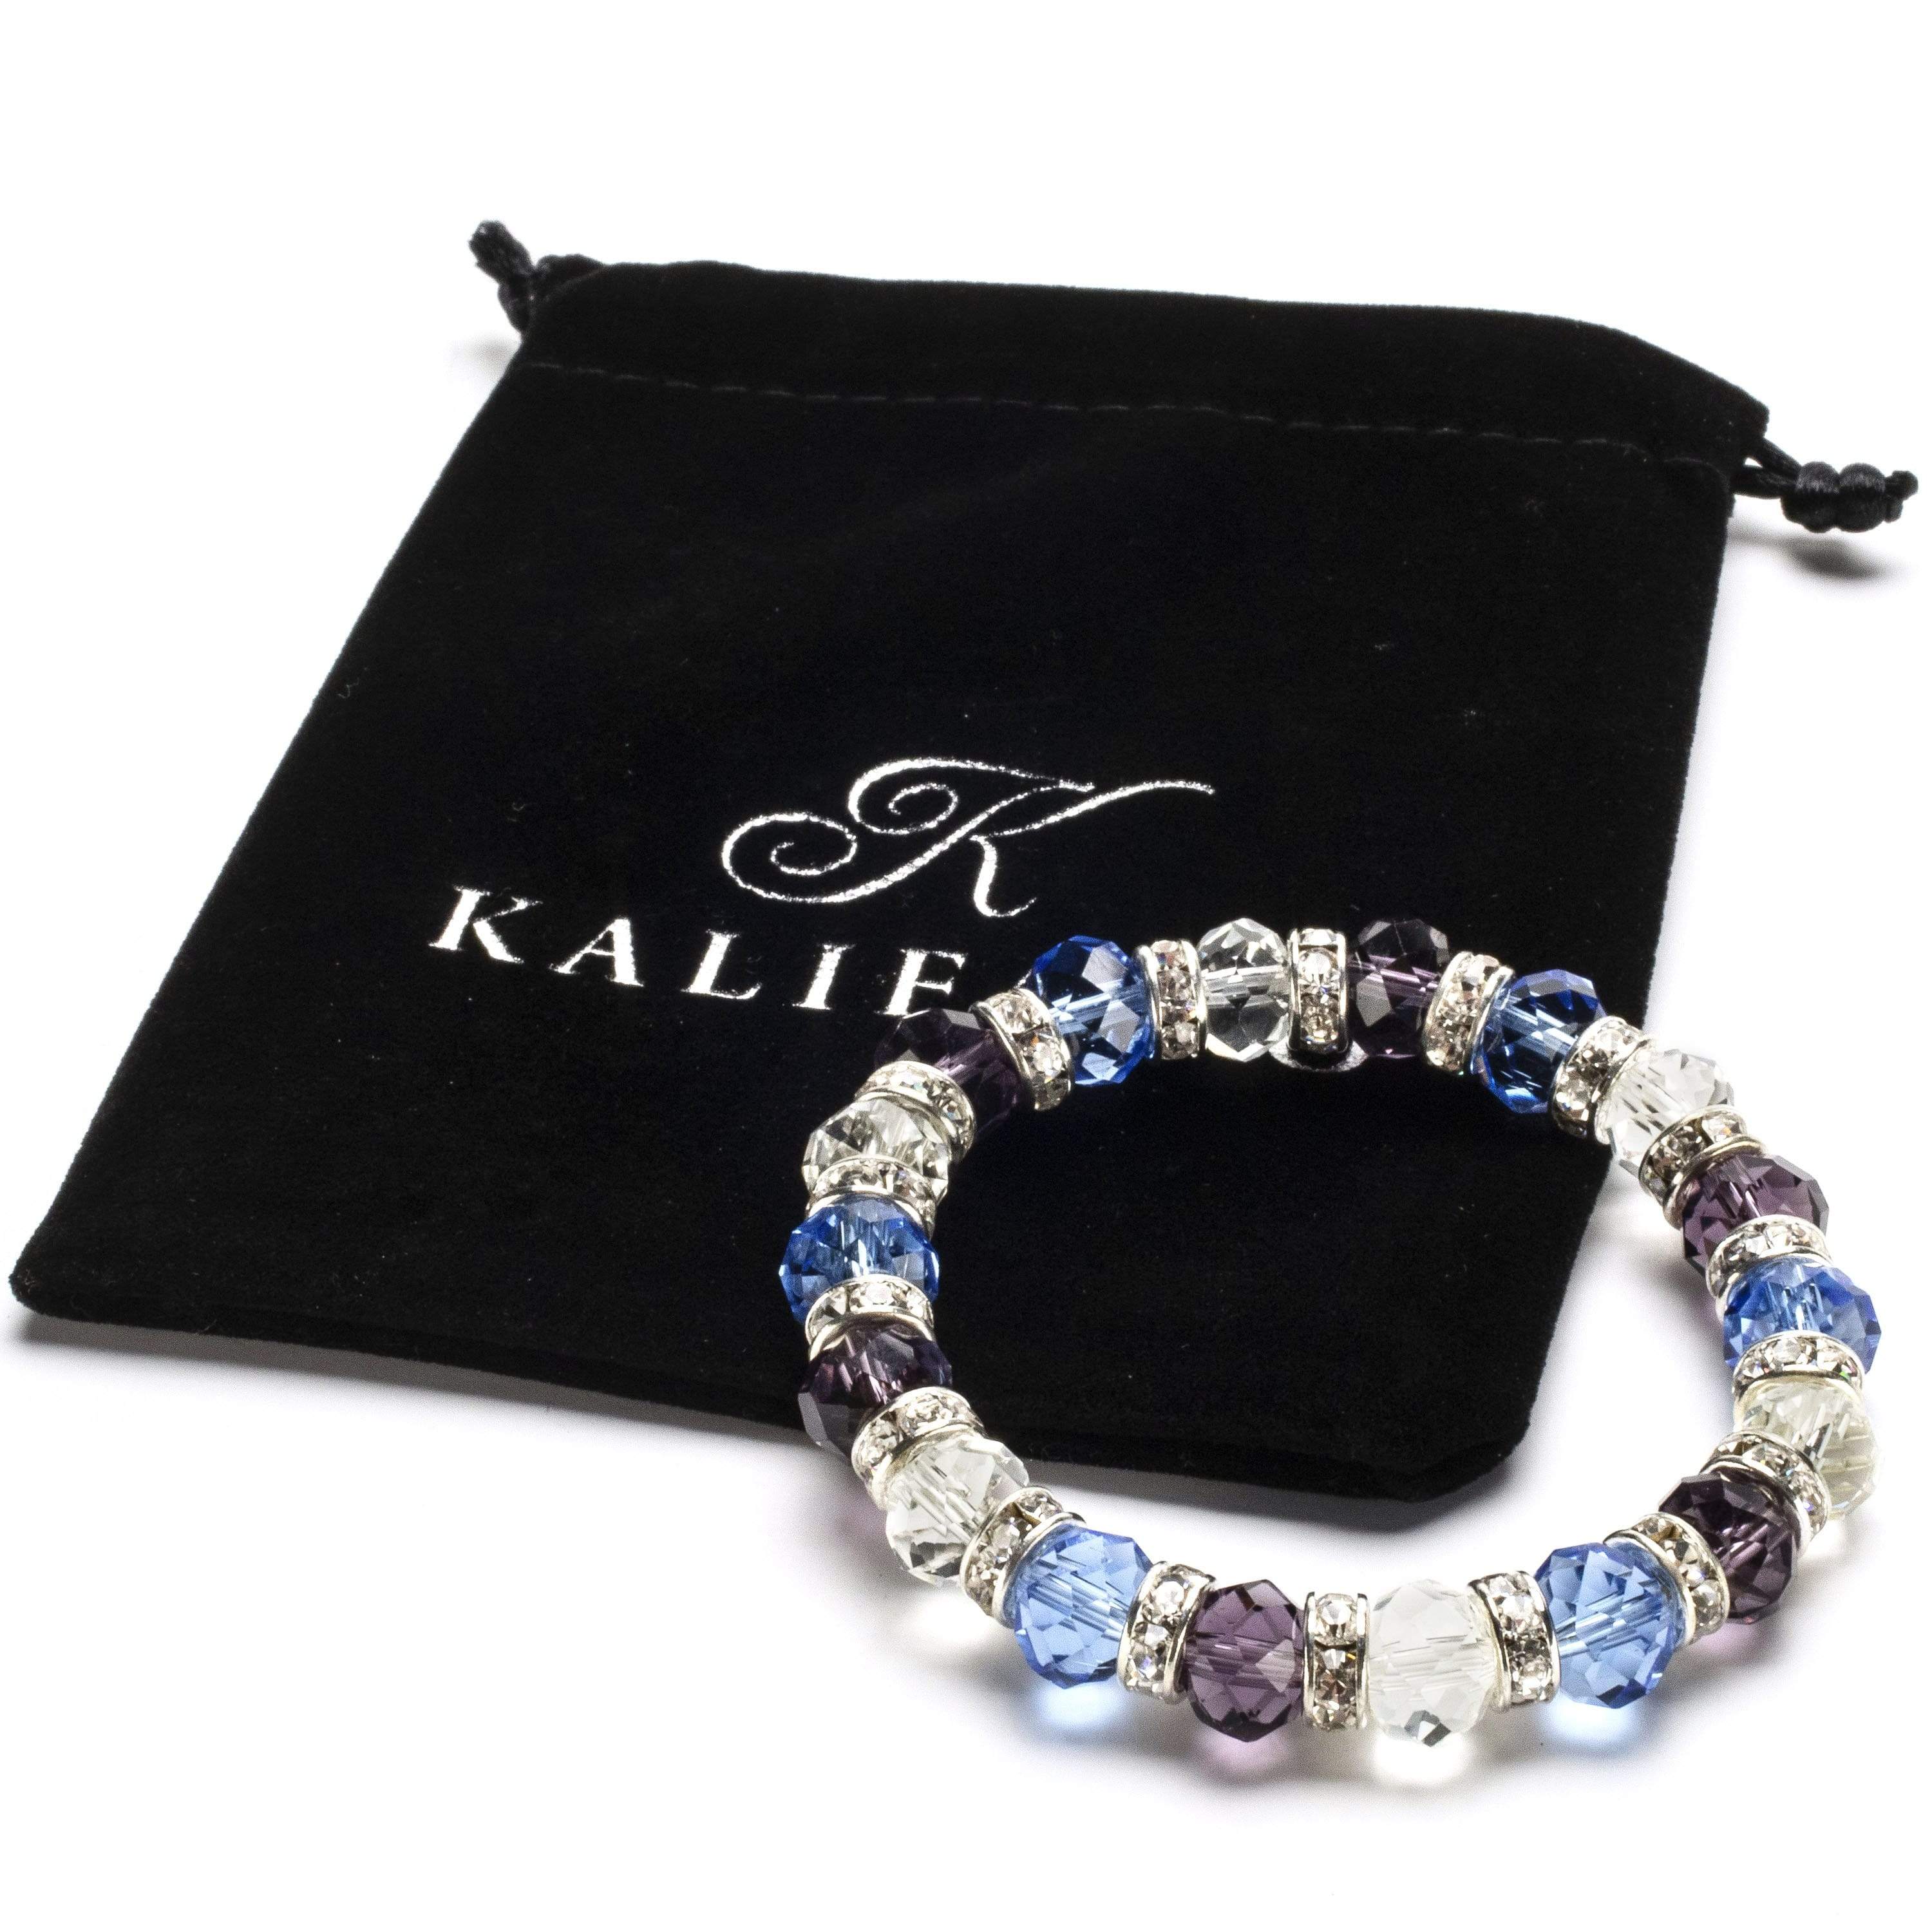 Kalifano Gorgeous Glass Jewelry Multi-Colored Gorgeous Glass Bracelet with Cubic Zirconia Crystals BLUE-BGG-09